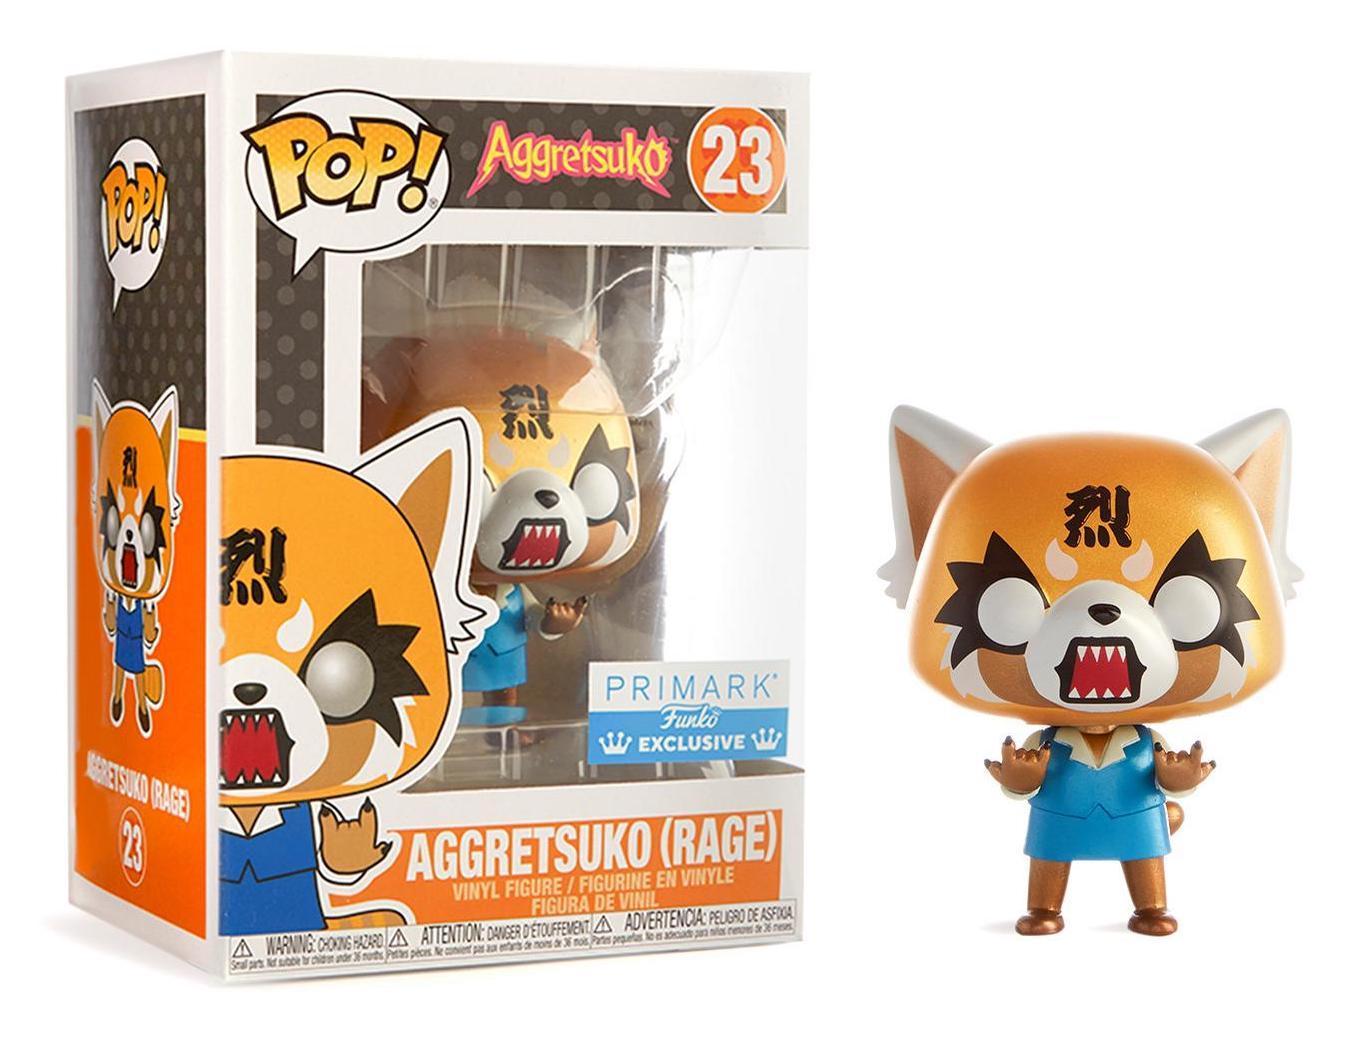 Hovedløse to Garderobe Funko POP! Vinyl Figure - Aggretsuko (Rage) (Metallic) (Primark) (Mint):  Sell2BBNovelties.com: Sell TY Beanie Babies, Action Figures, Barbies, Cards  & Toys selling online